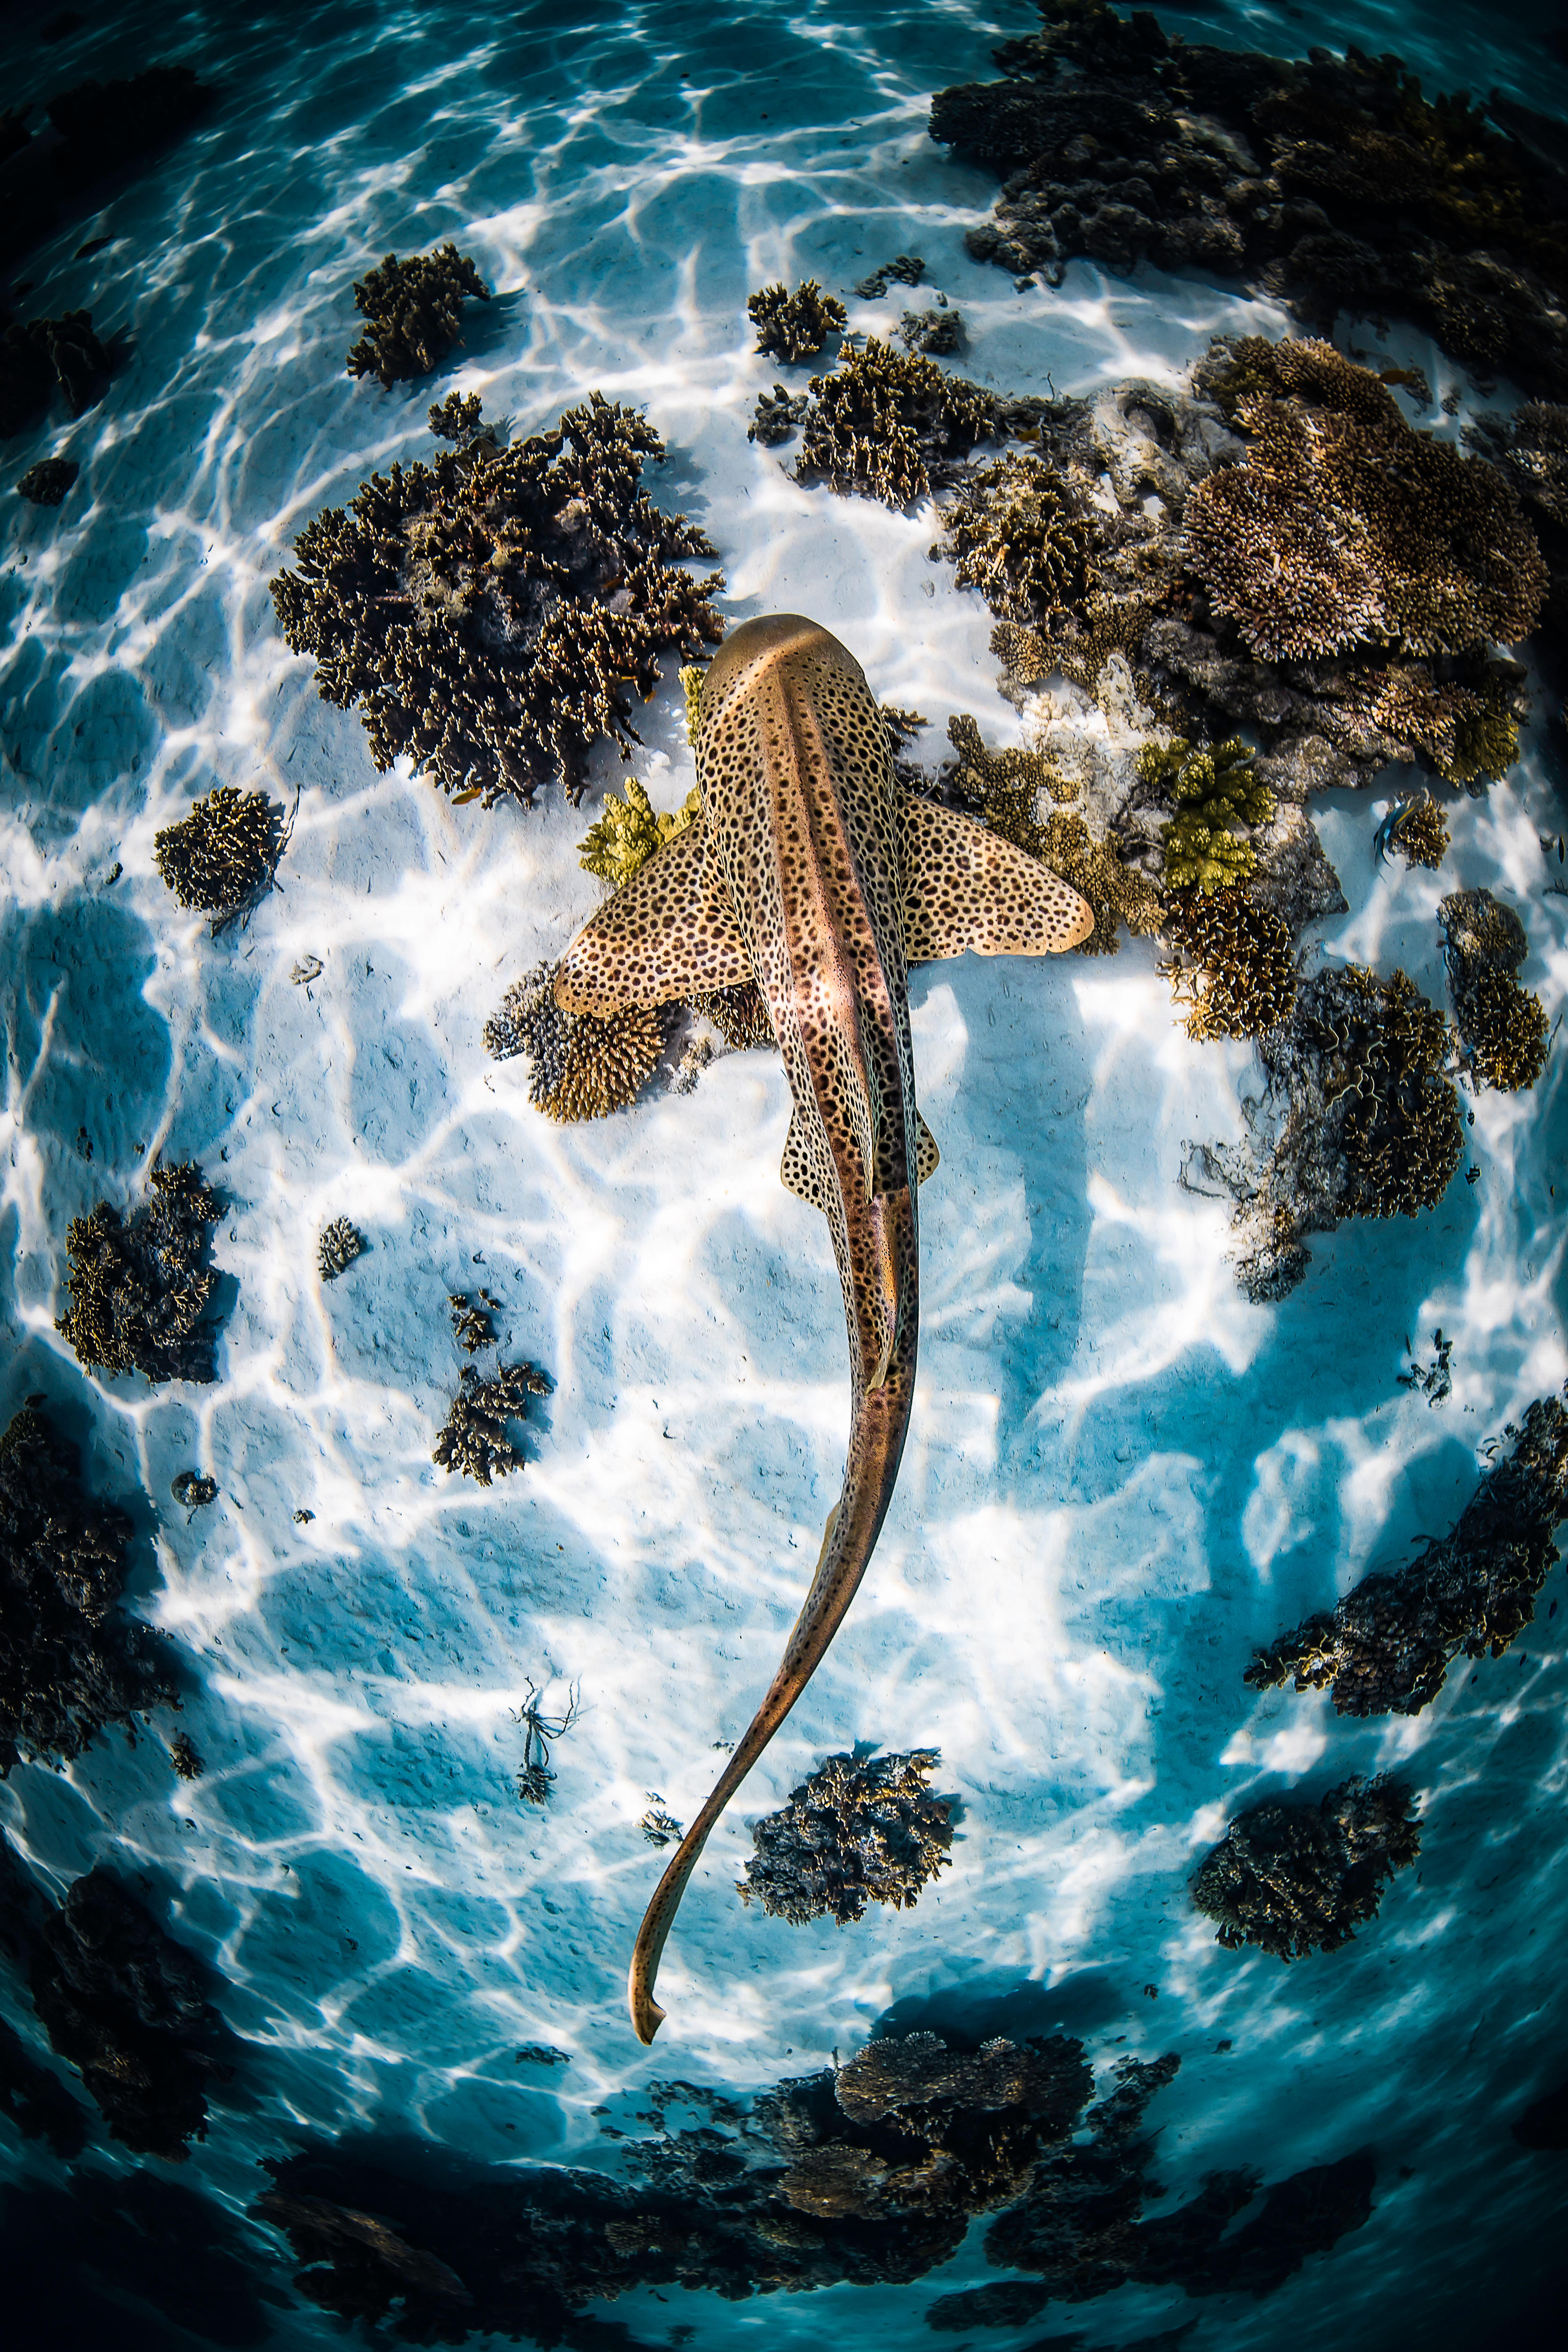 An image of a leopard shark from above